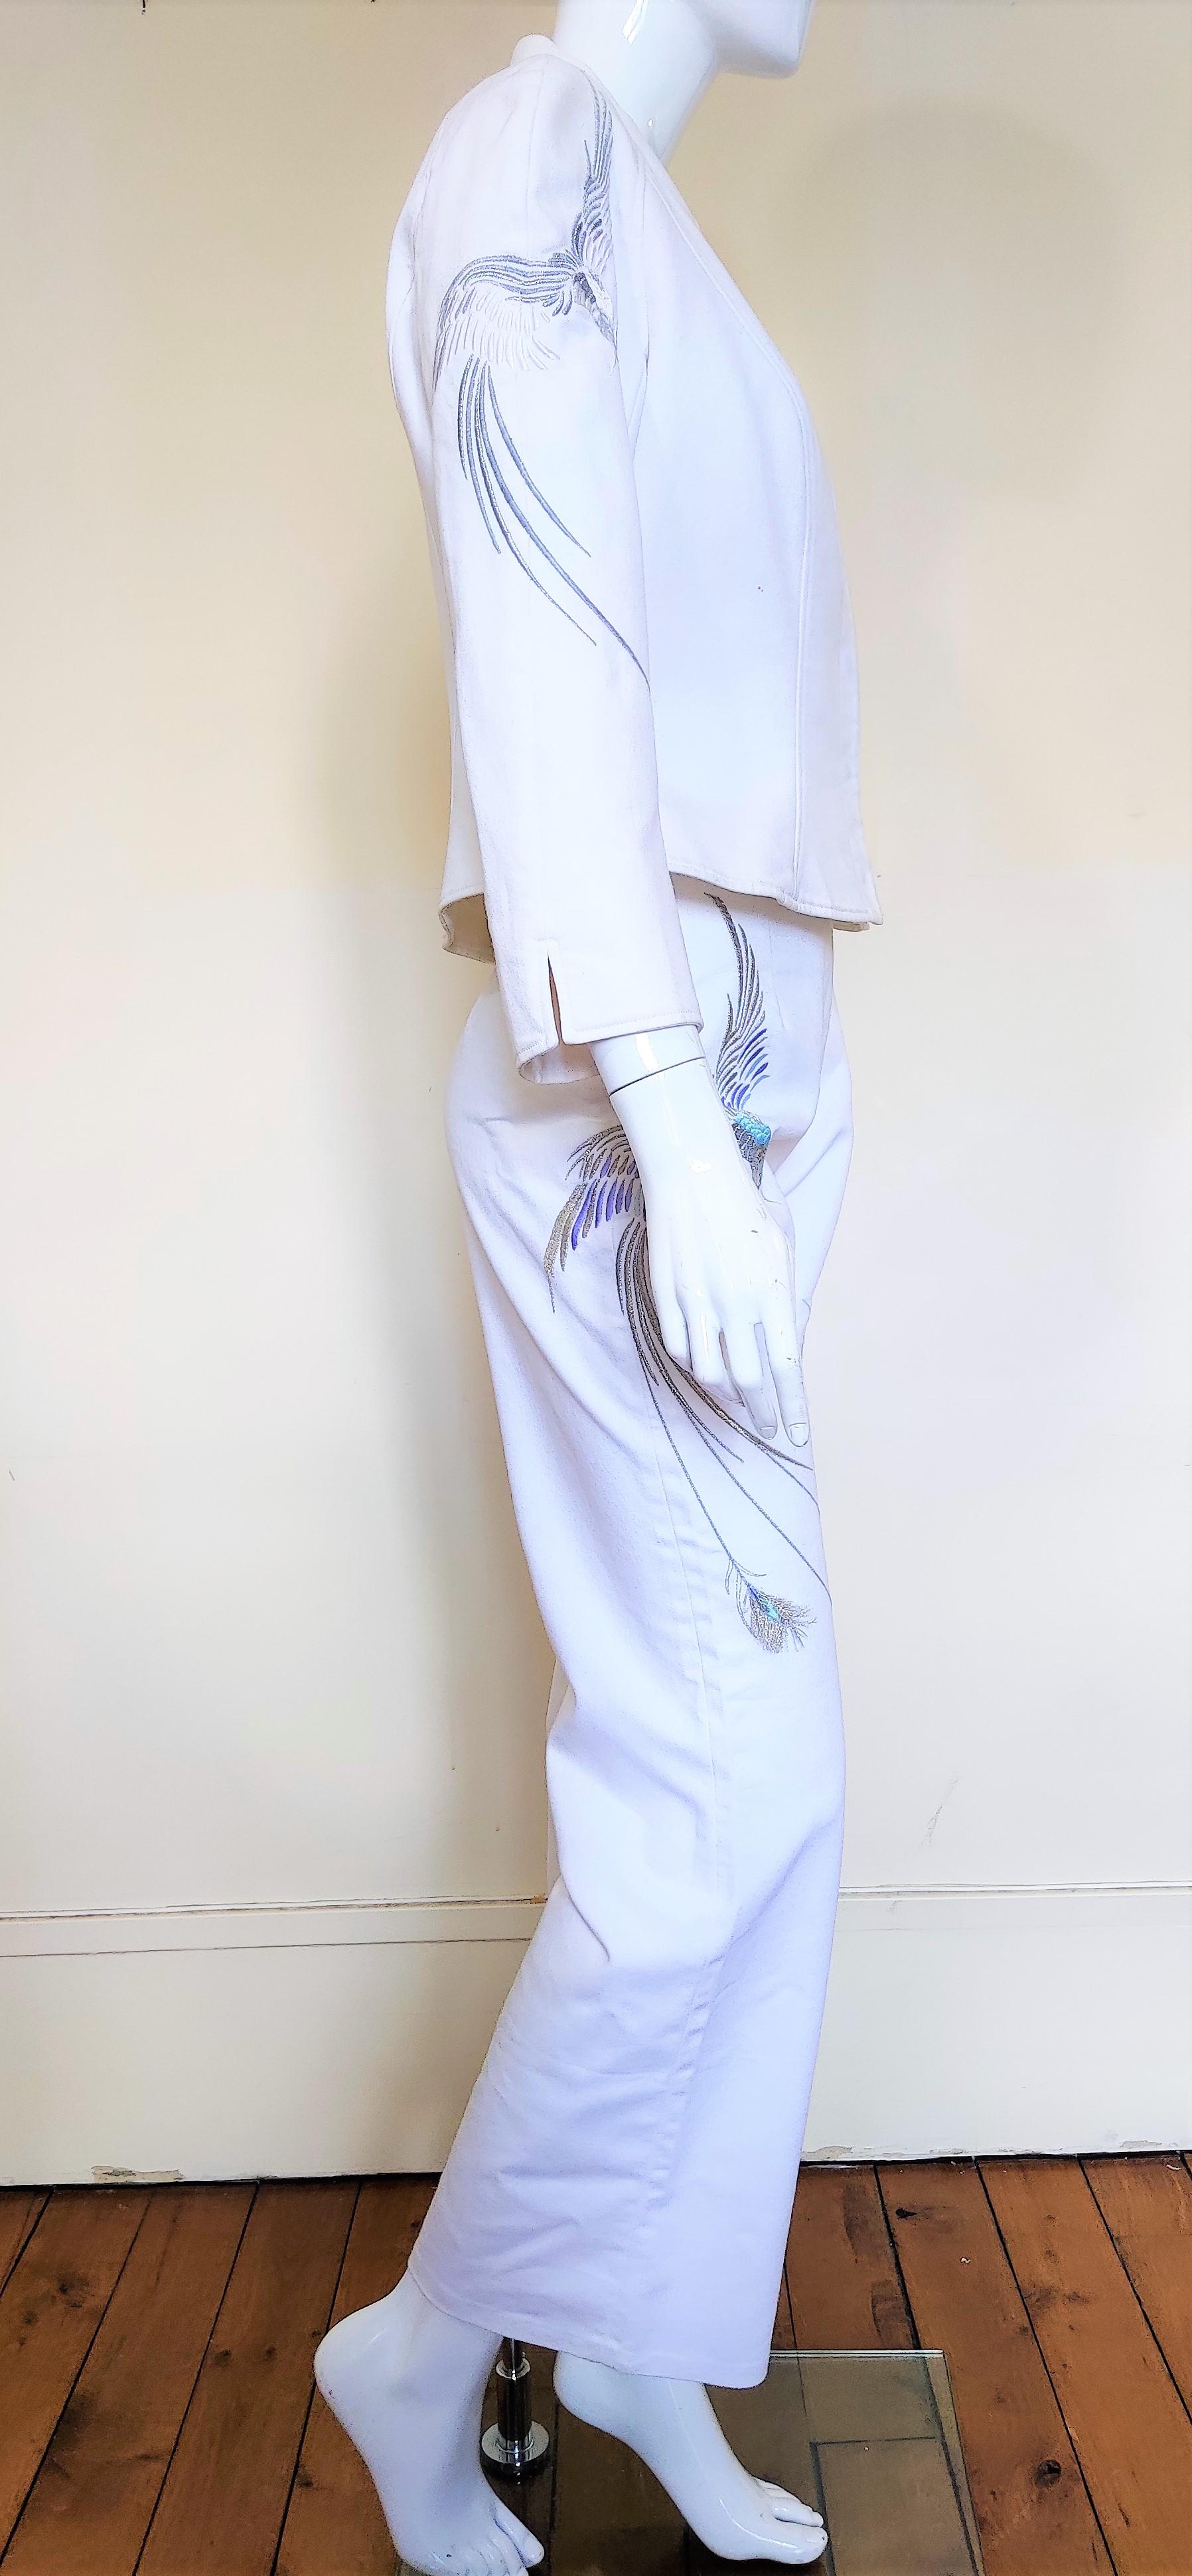 Thierry Mugler Peacock Bird White Gown Couture Pants Jacket Ensemble Suit For Sale 5